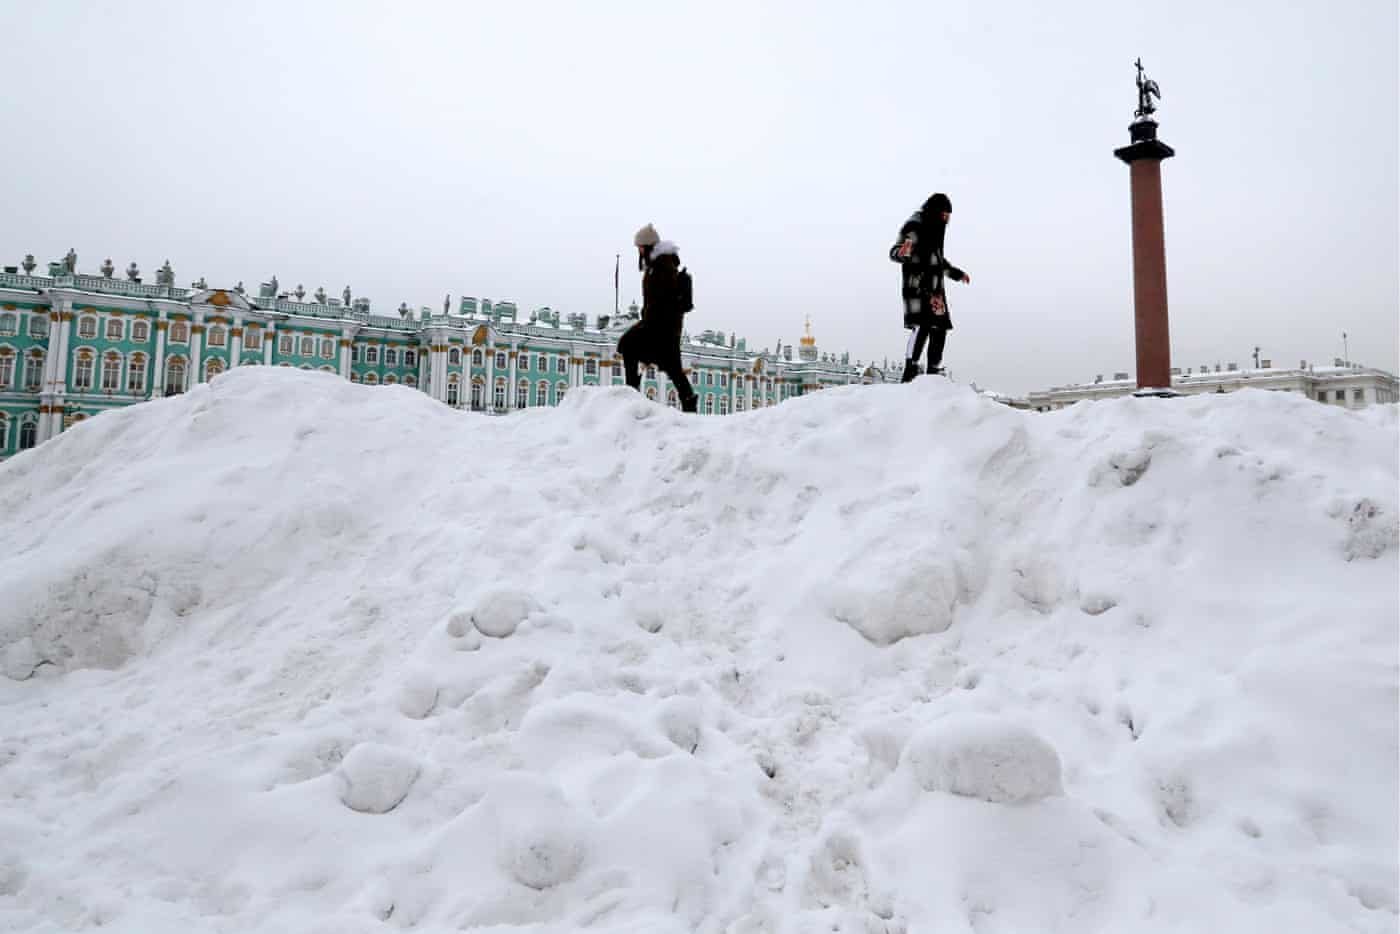 Girls climb piles of snow in Dvortsovaya (Palace) Square near the Winter Palace after a heavy snowfall in St Petersburg, Russia